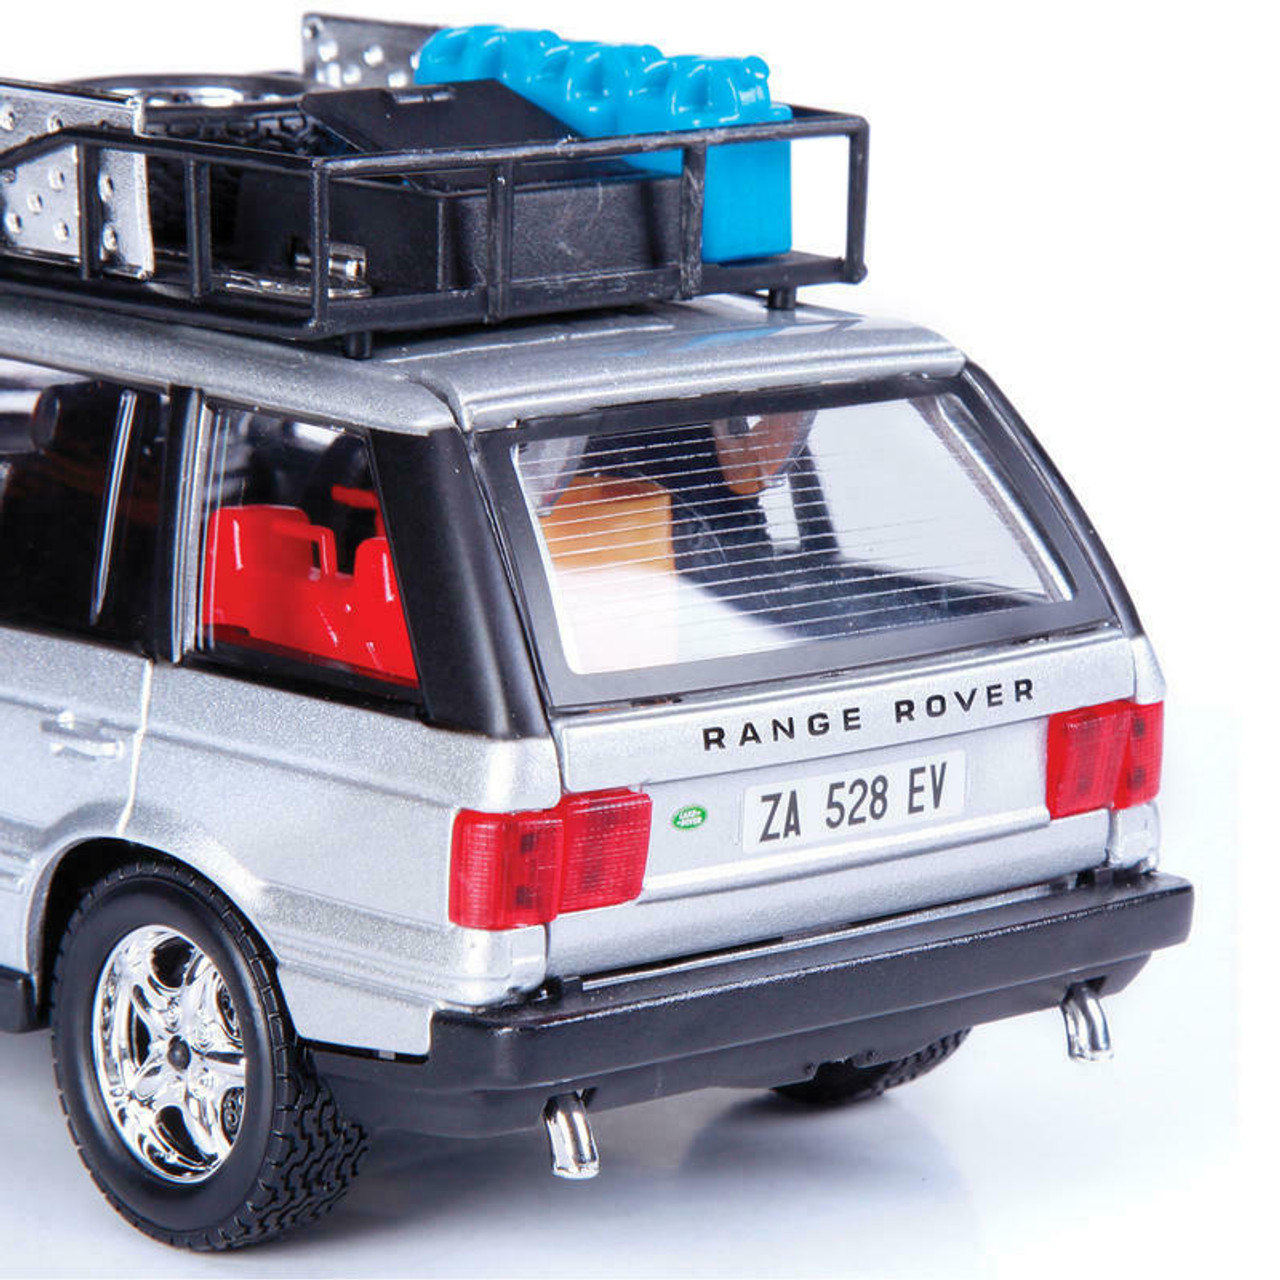 1:24 Range Rover Replica Model Car Vehicle Highly Detailed Diecast Toy Silver 